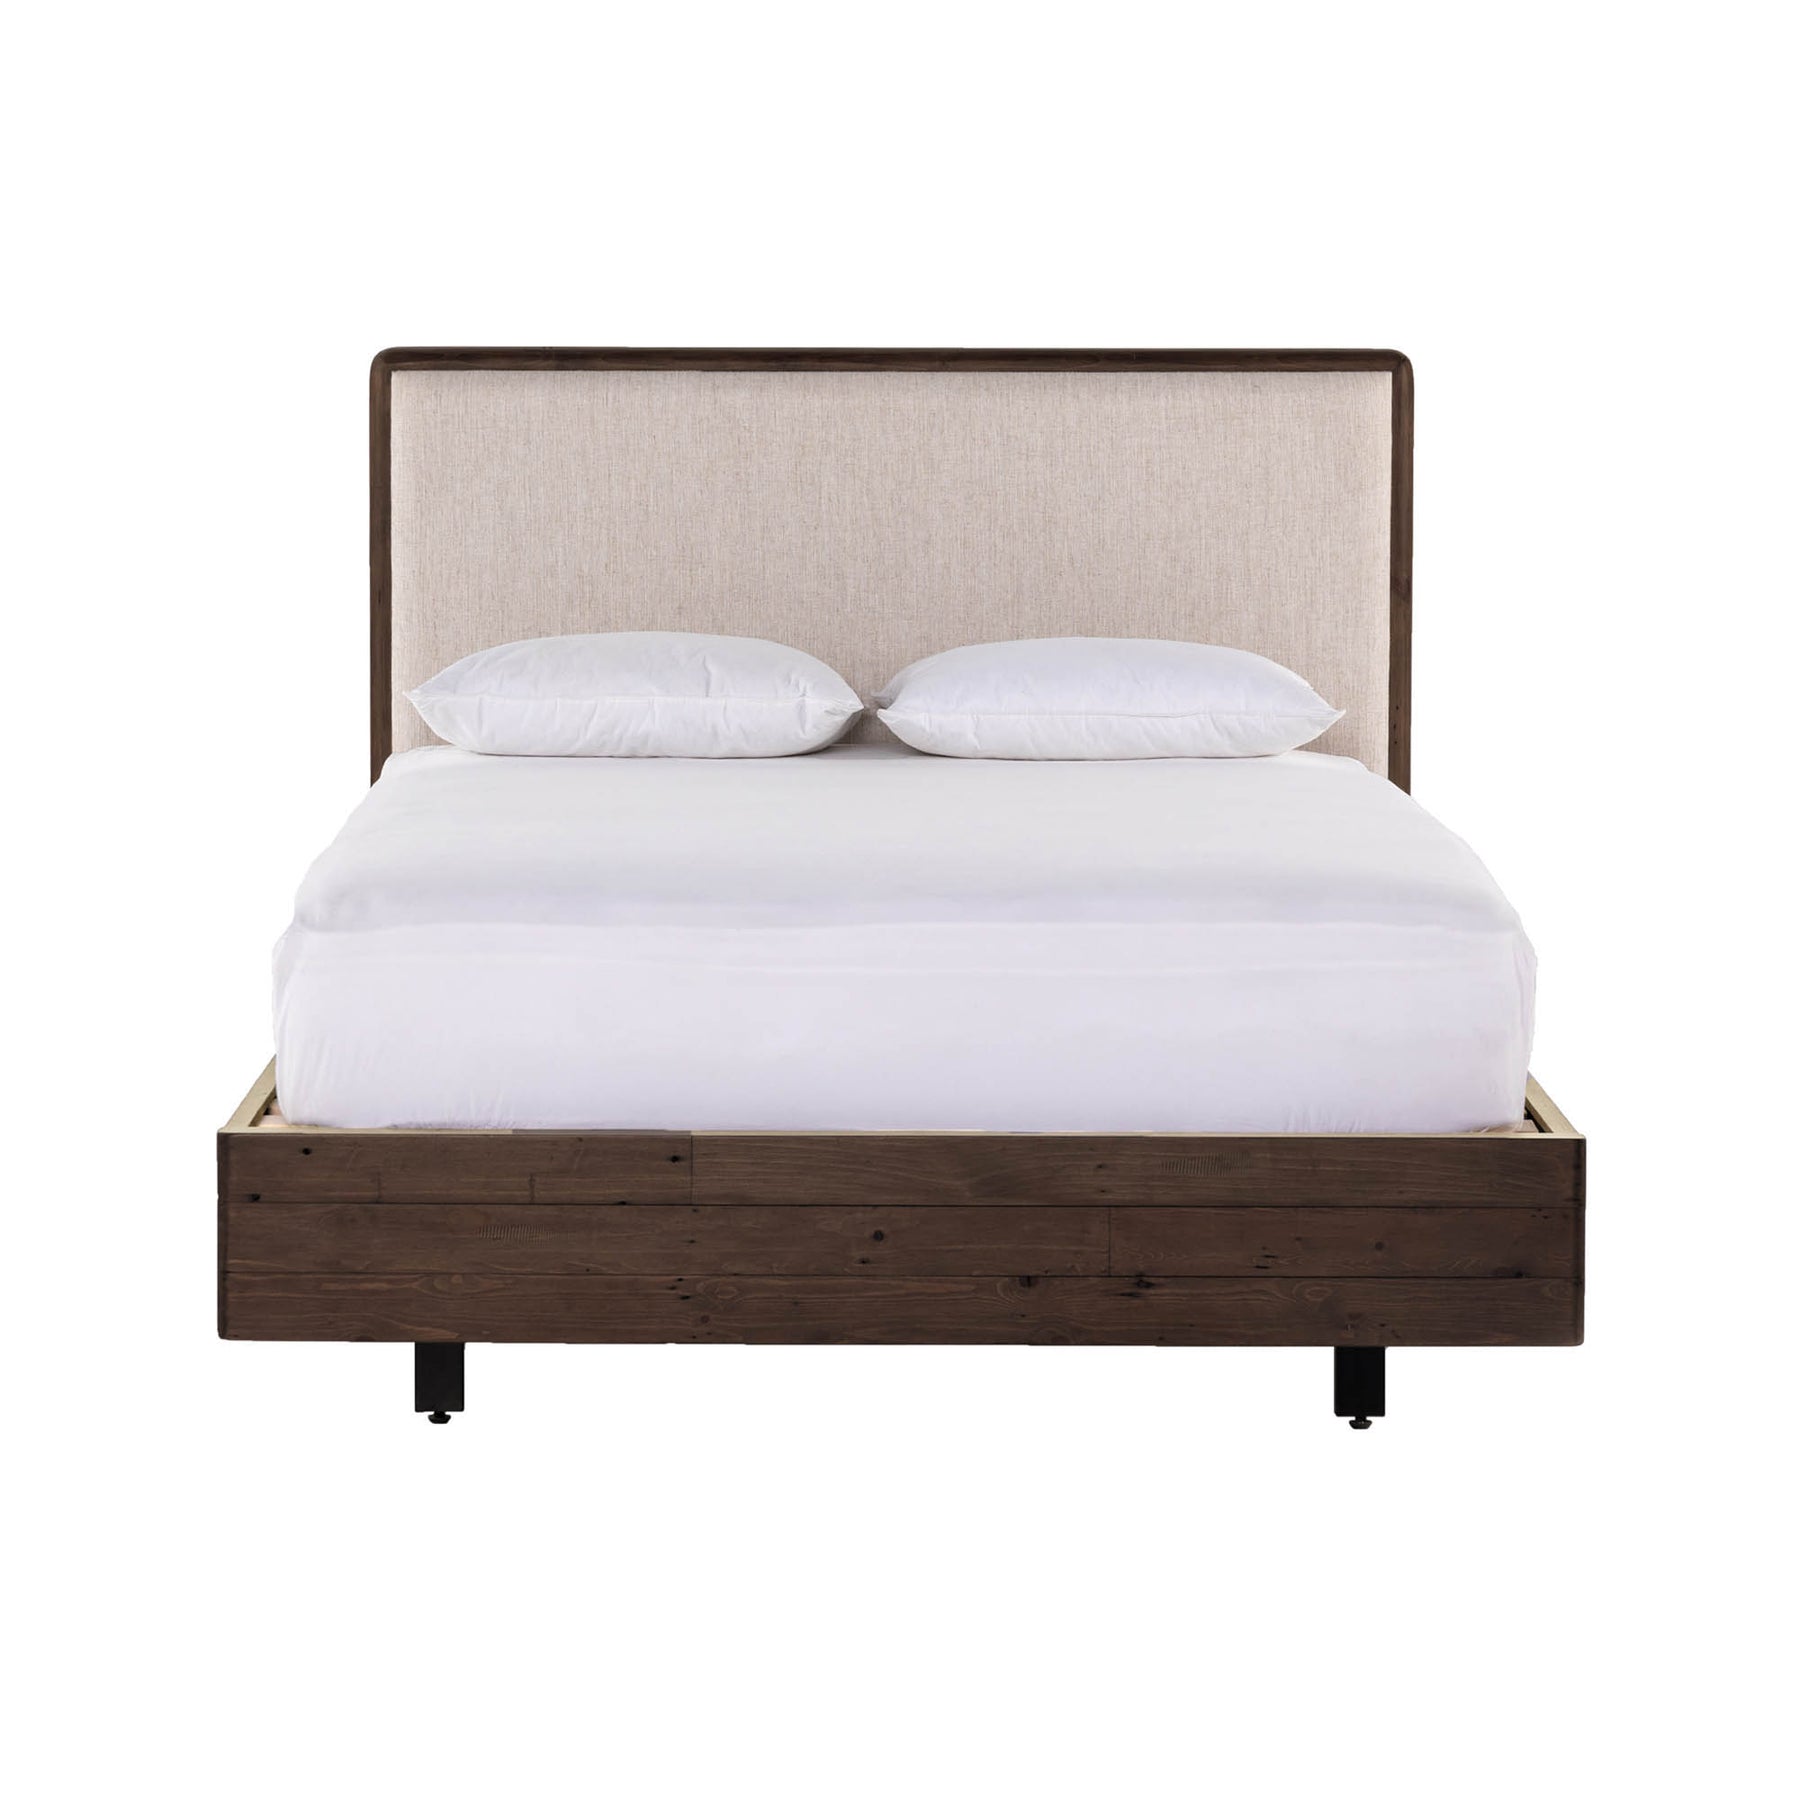 Queen Size Beds & Bed Frames for sale in Chilliwack, British